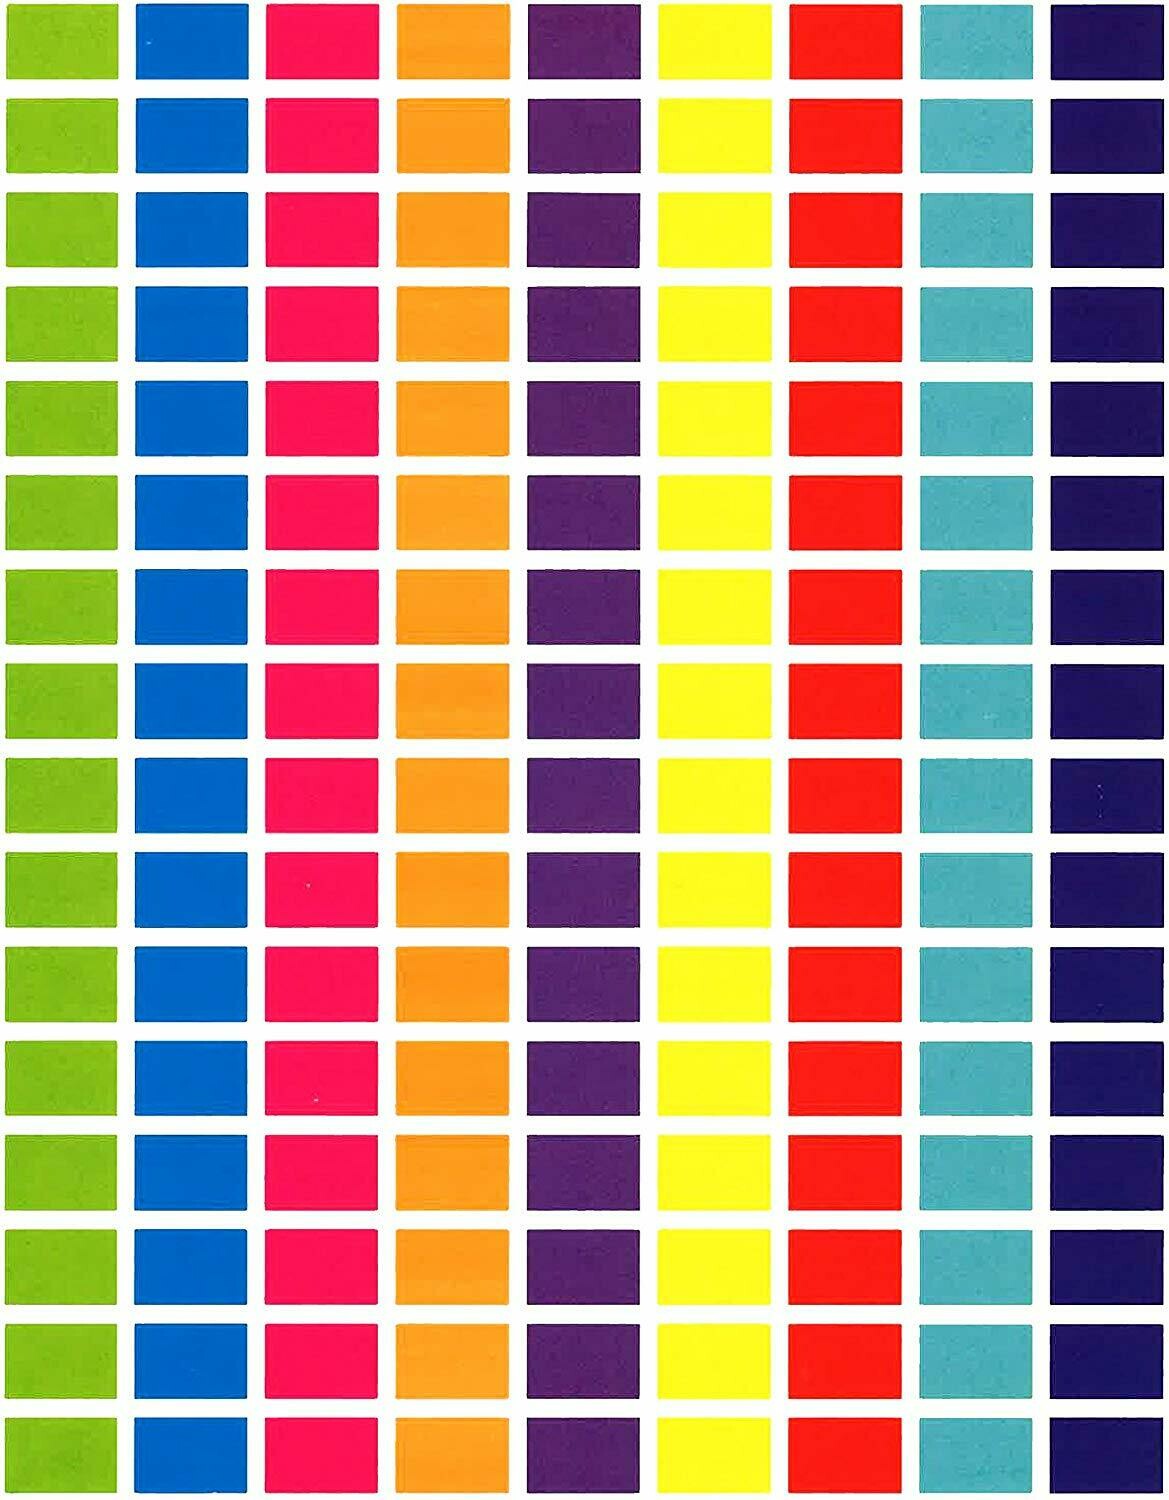 Tag-A-Room 1/2" x 3/4" Rectangle Color Coding Dot Label Stickers, 9 Bright Colors, 8 1/2" x 11" Sheet (2016 Pack)